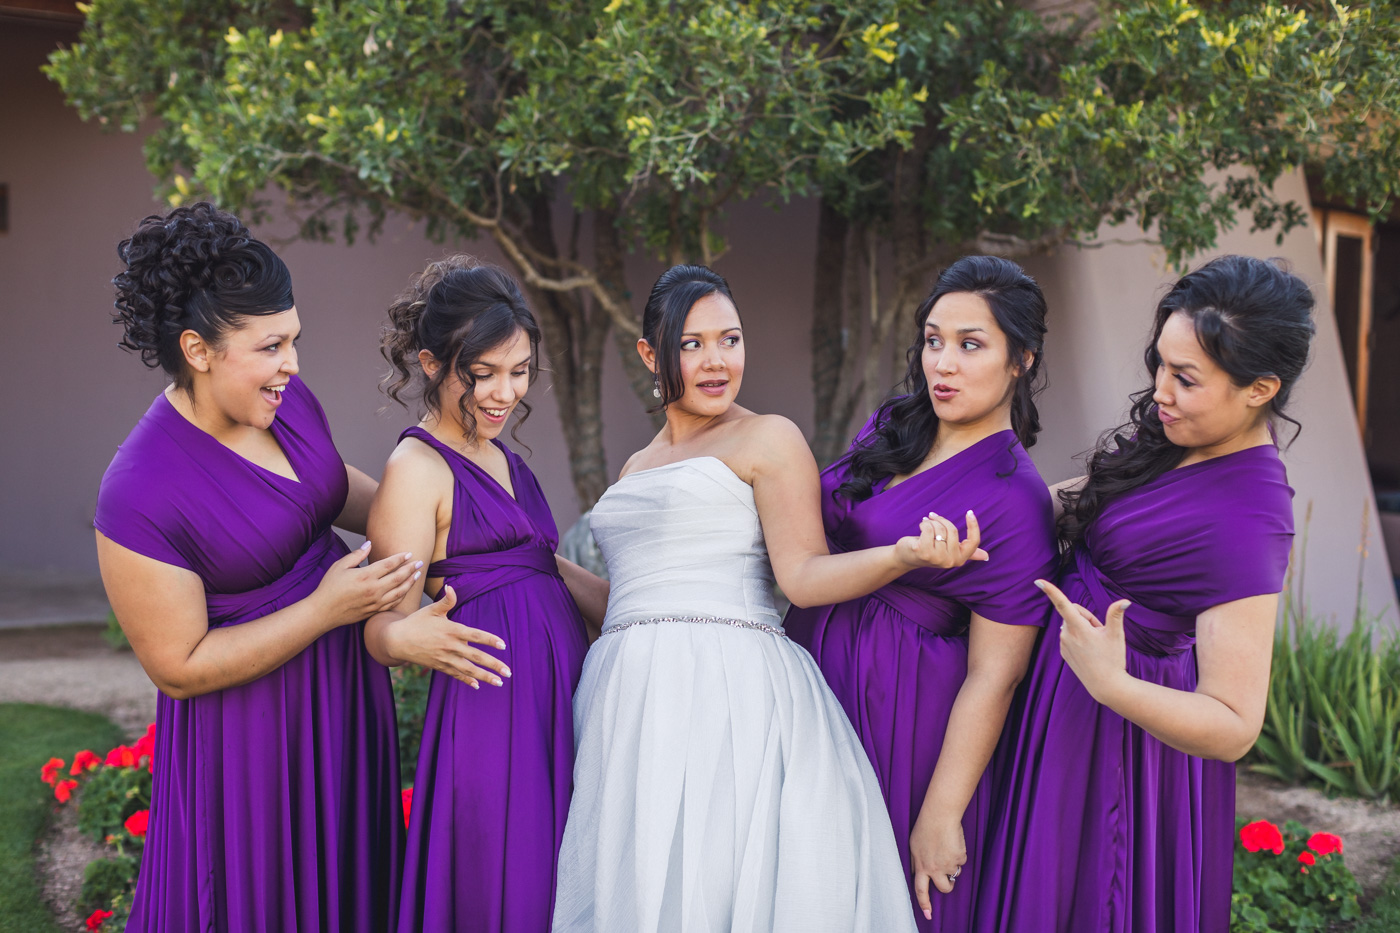 bride-and-bridesmaids-checking-each-other-out